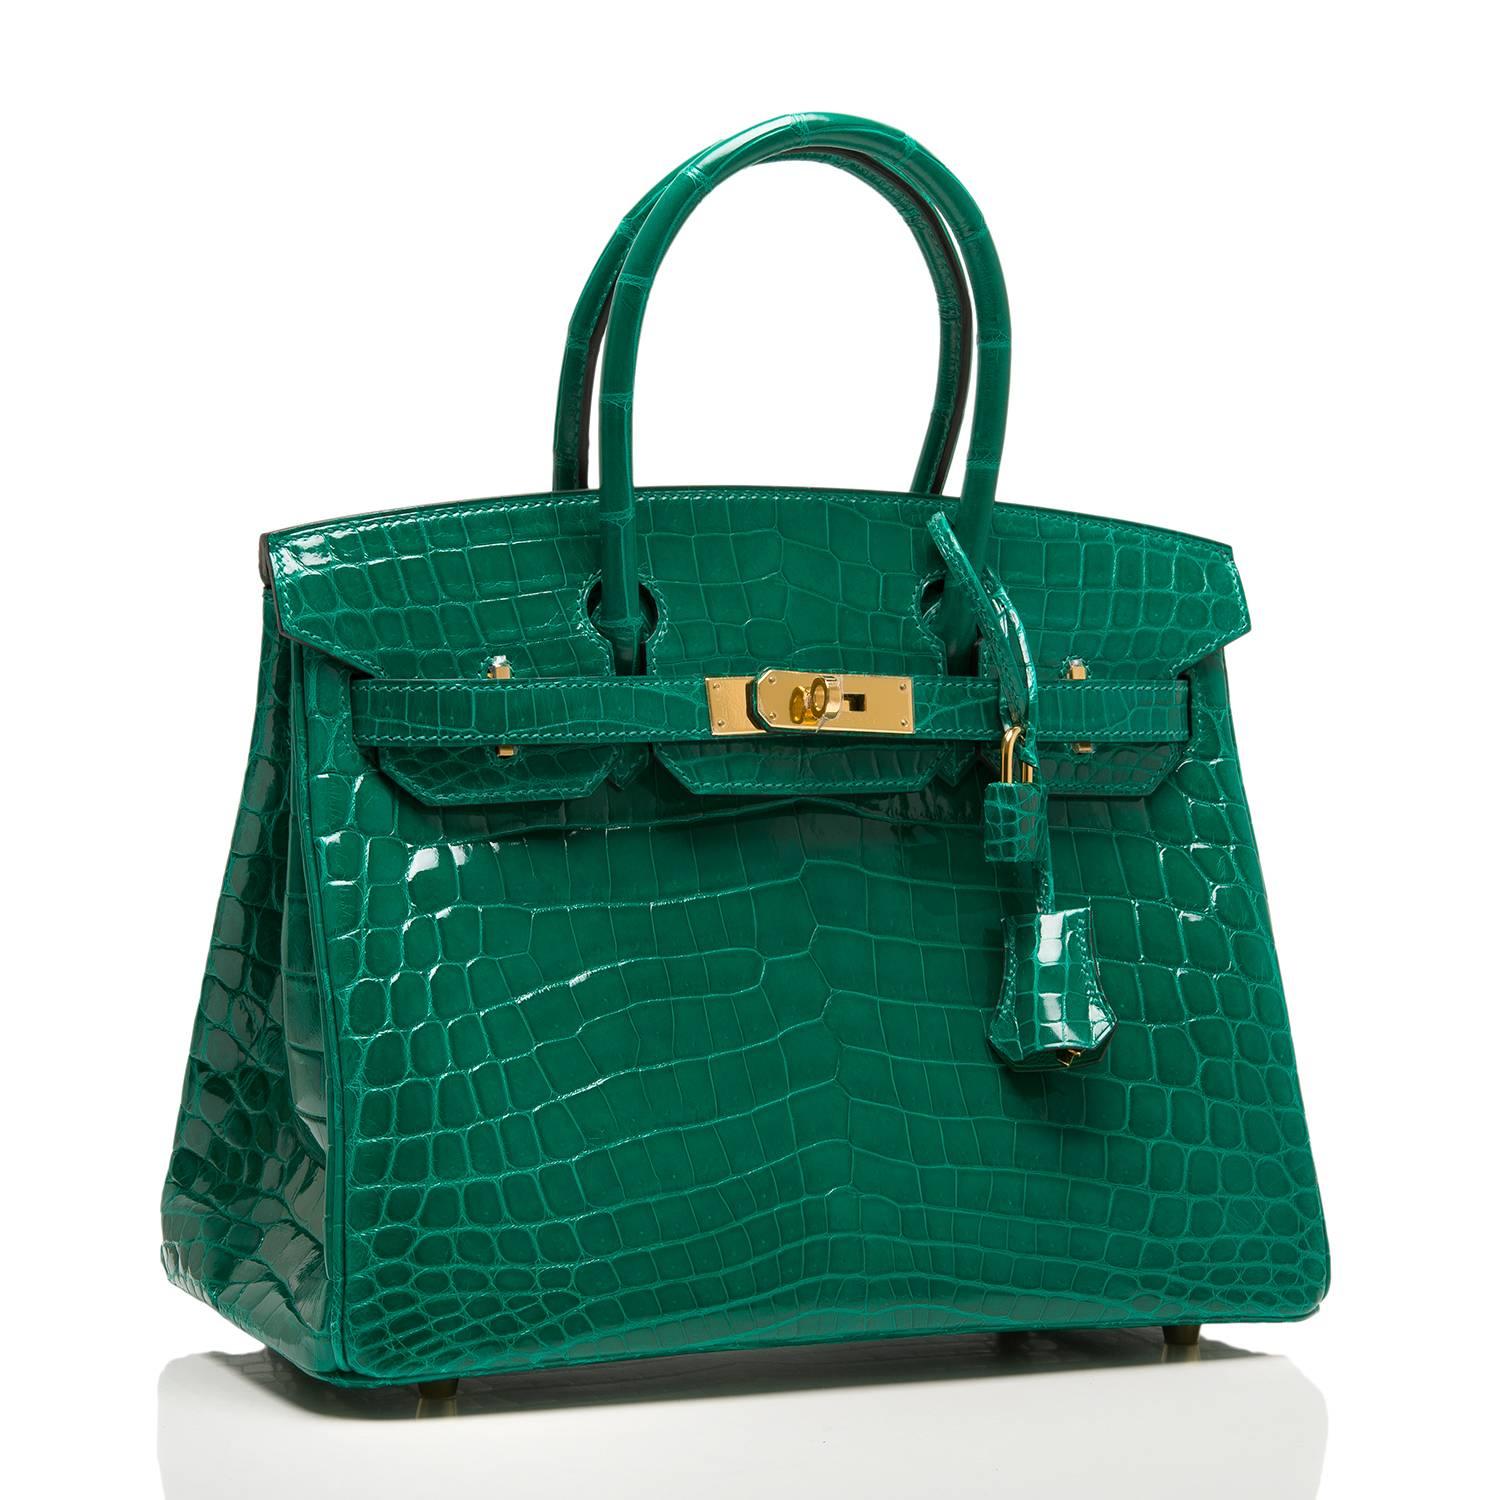 Hermes Emerald (Vert Emeraude) Birkin 30cm in shiny Nilo crocodile with gold hardware.

This Birkin features tonal stitching, front toggle closure, clochette with lock and two keys, and double rolled handles. The interior is lined in Emerald